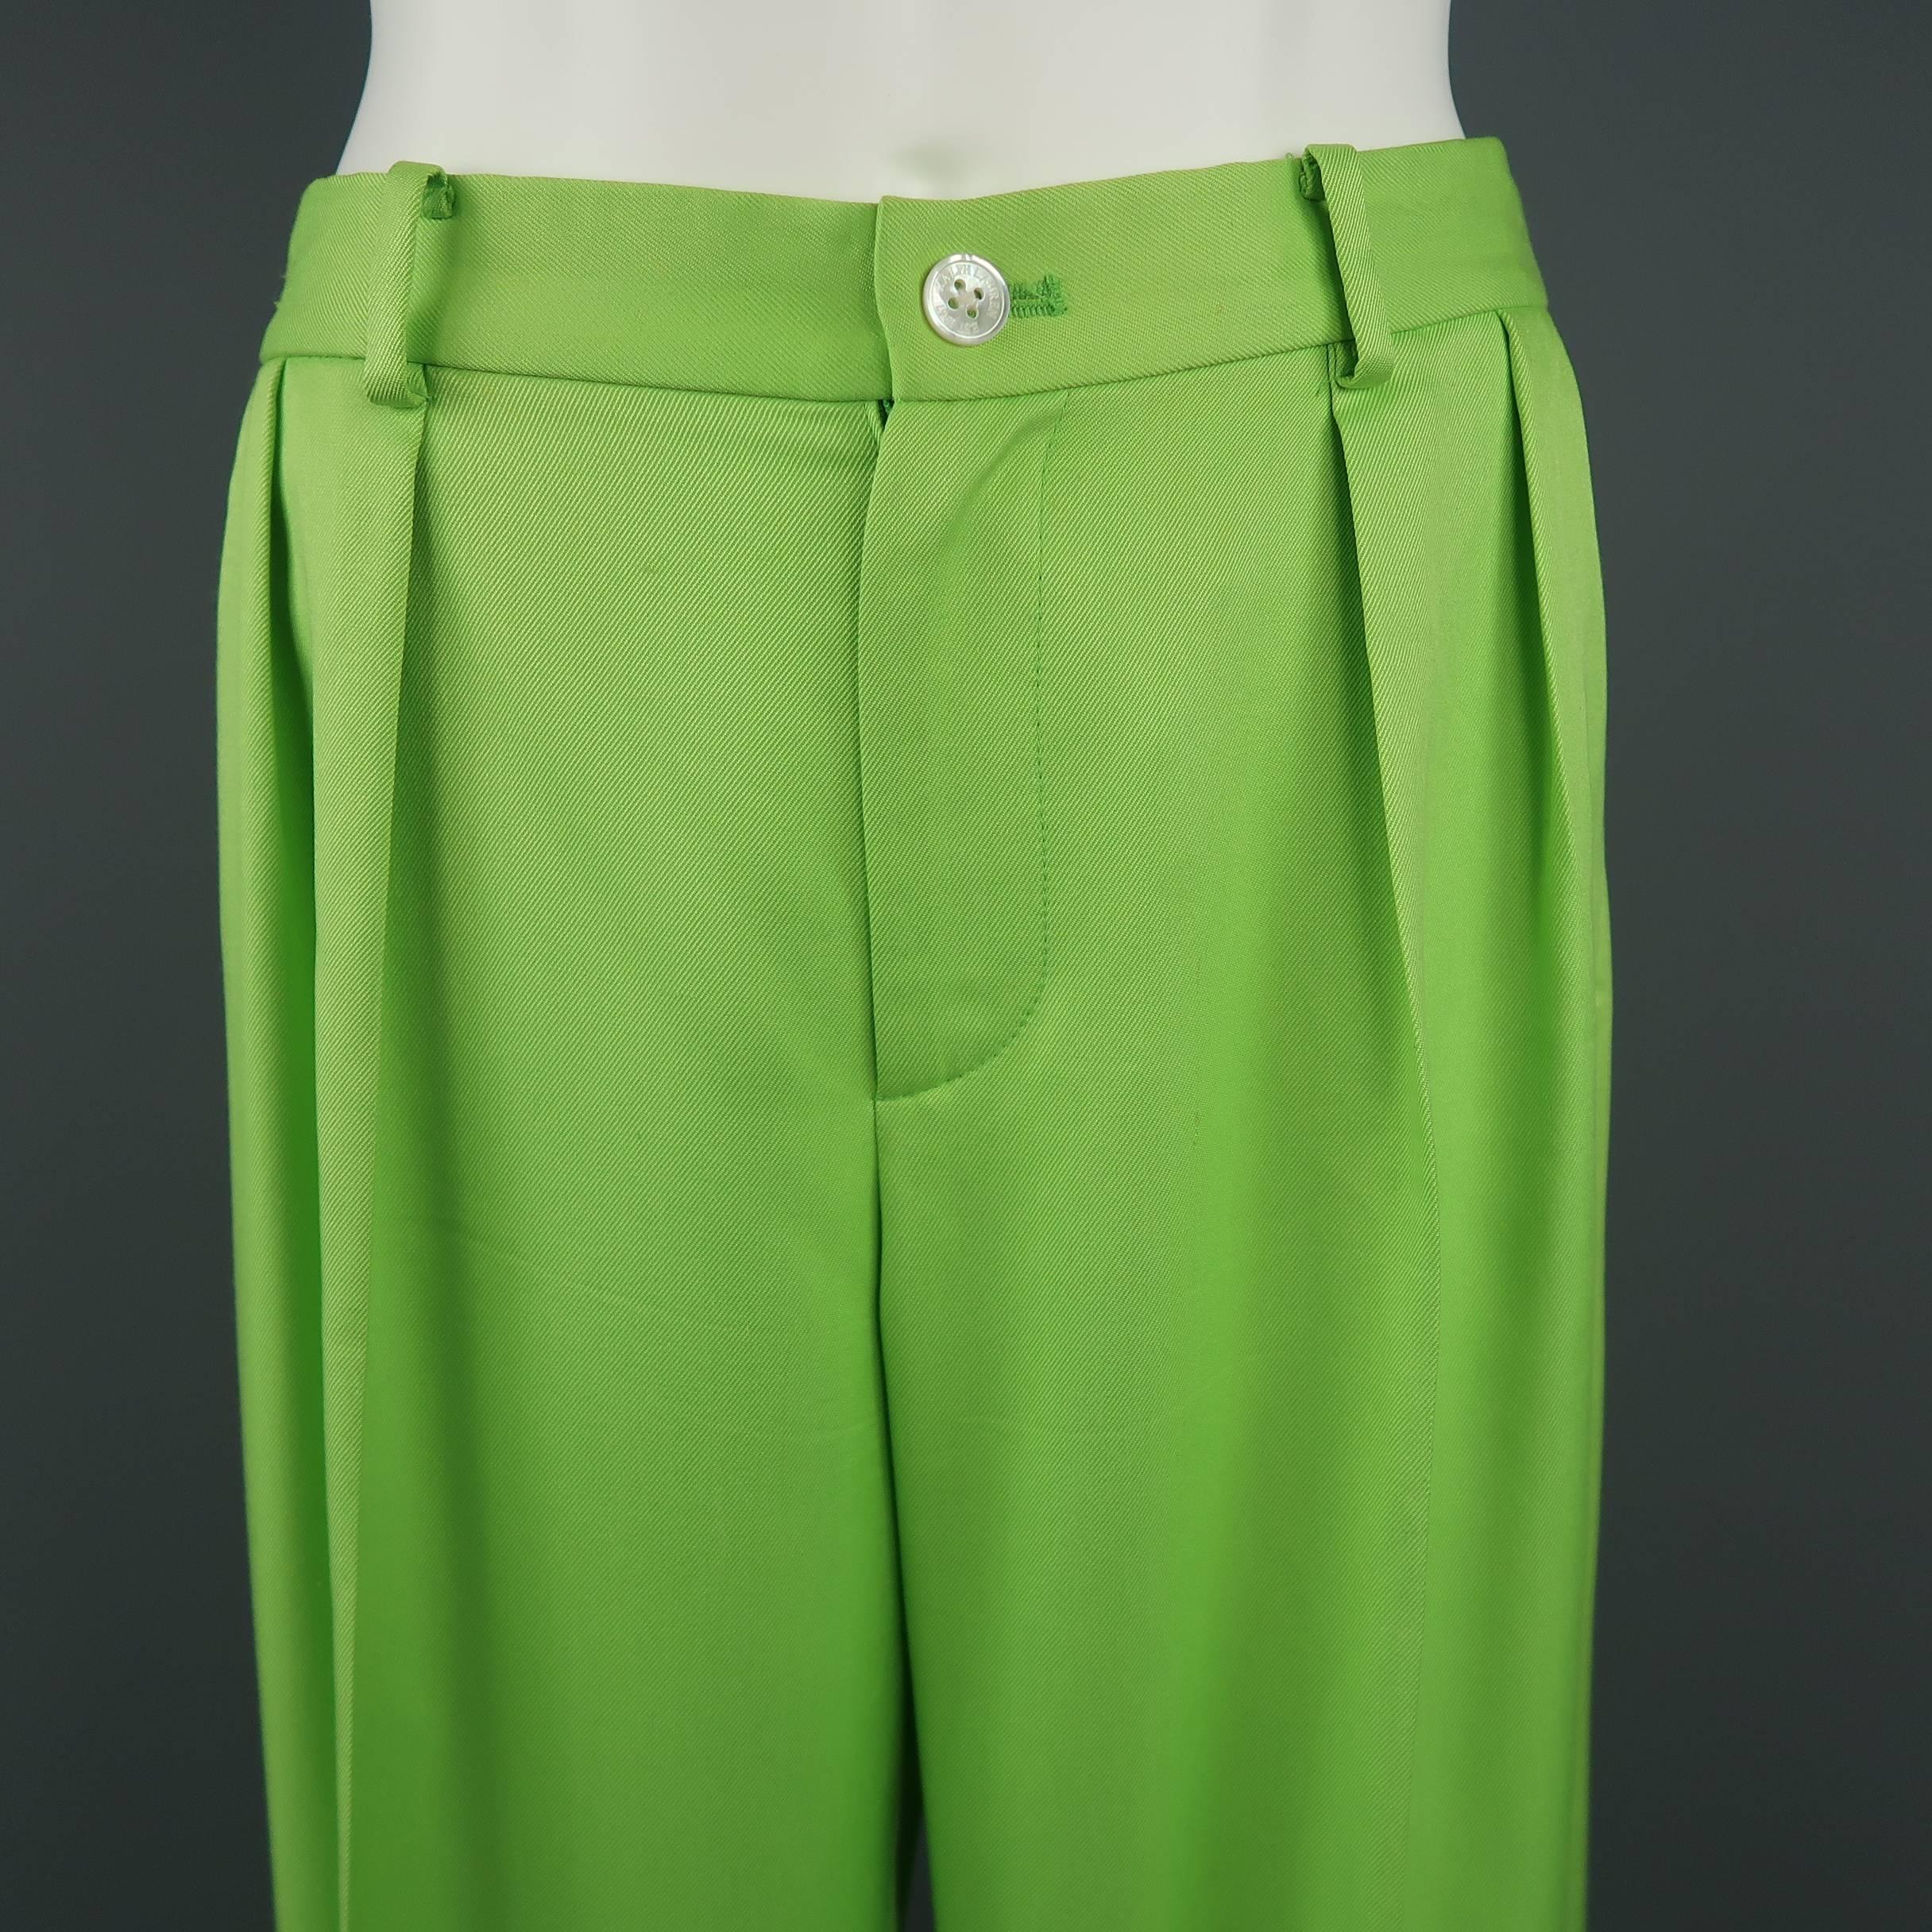 RALPH LAUREN COLLECTION dress pants come in a light green silk twill with a double pleat front, wide leg and cuffed hem. Discolorations shown in detail shots. As-is. Made in USA.
 
Fair Pre-Owned Condition.
Marked: 6
 
Measurements:
 
Waist: 31